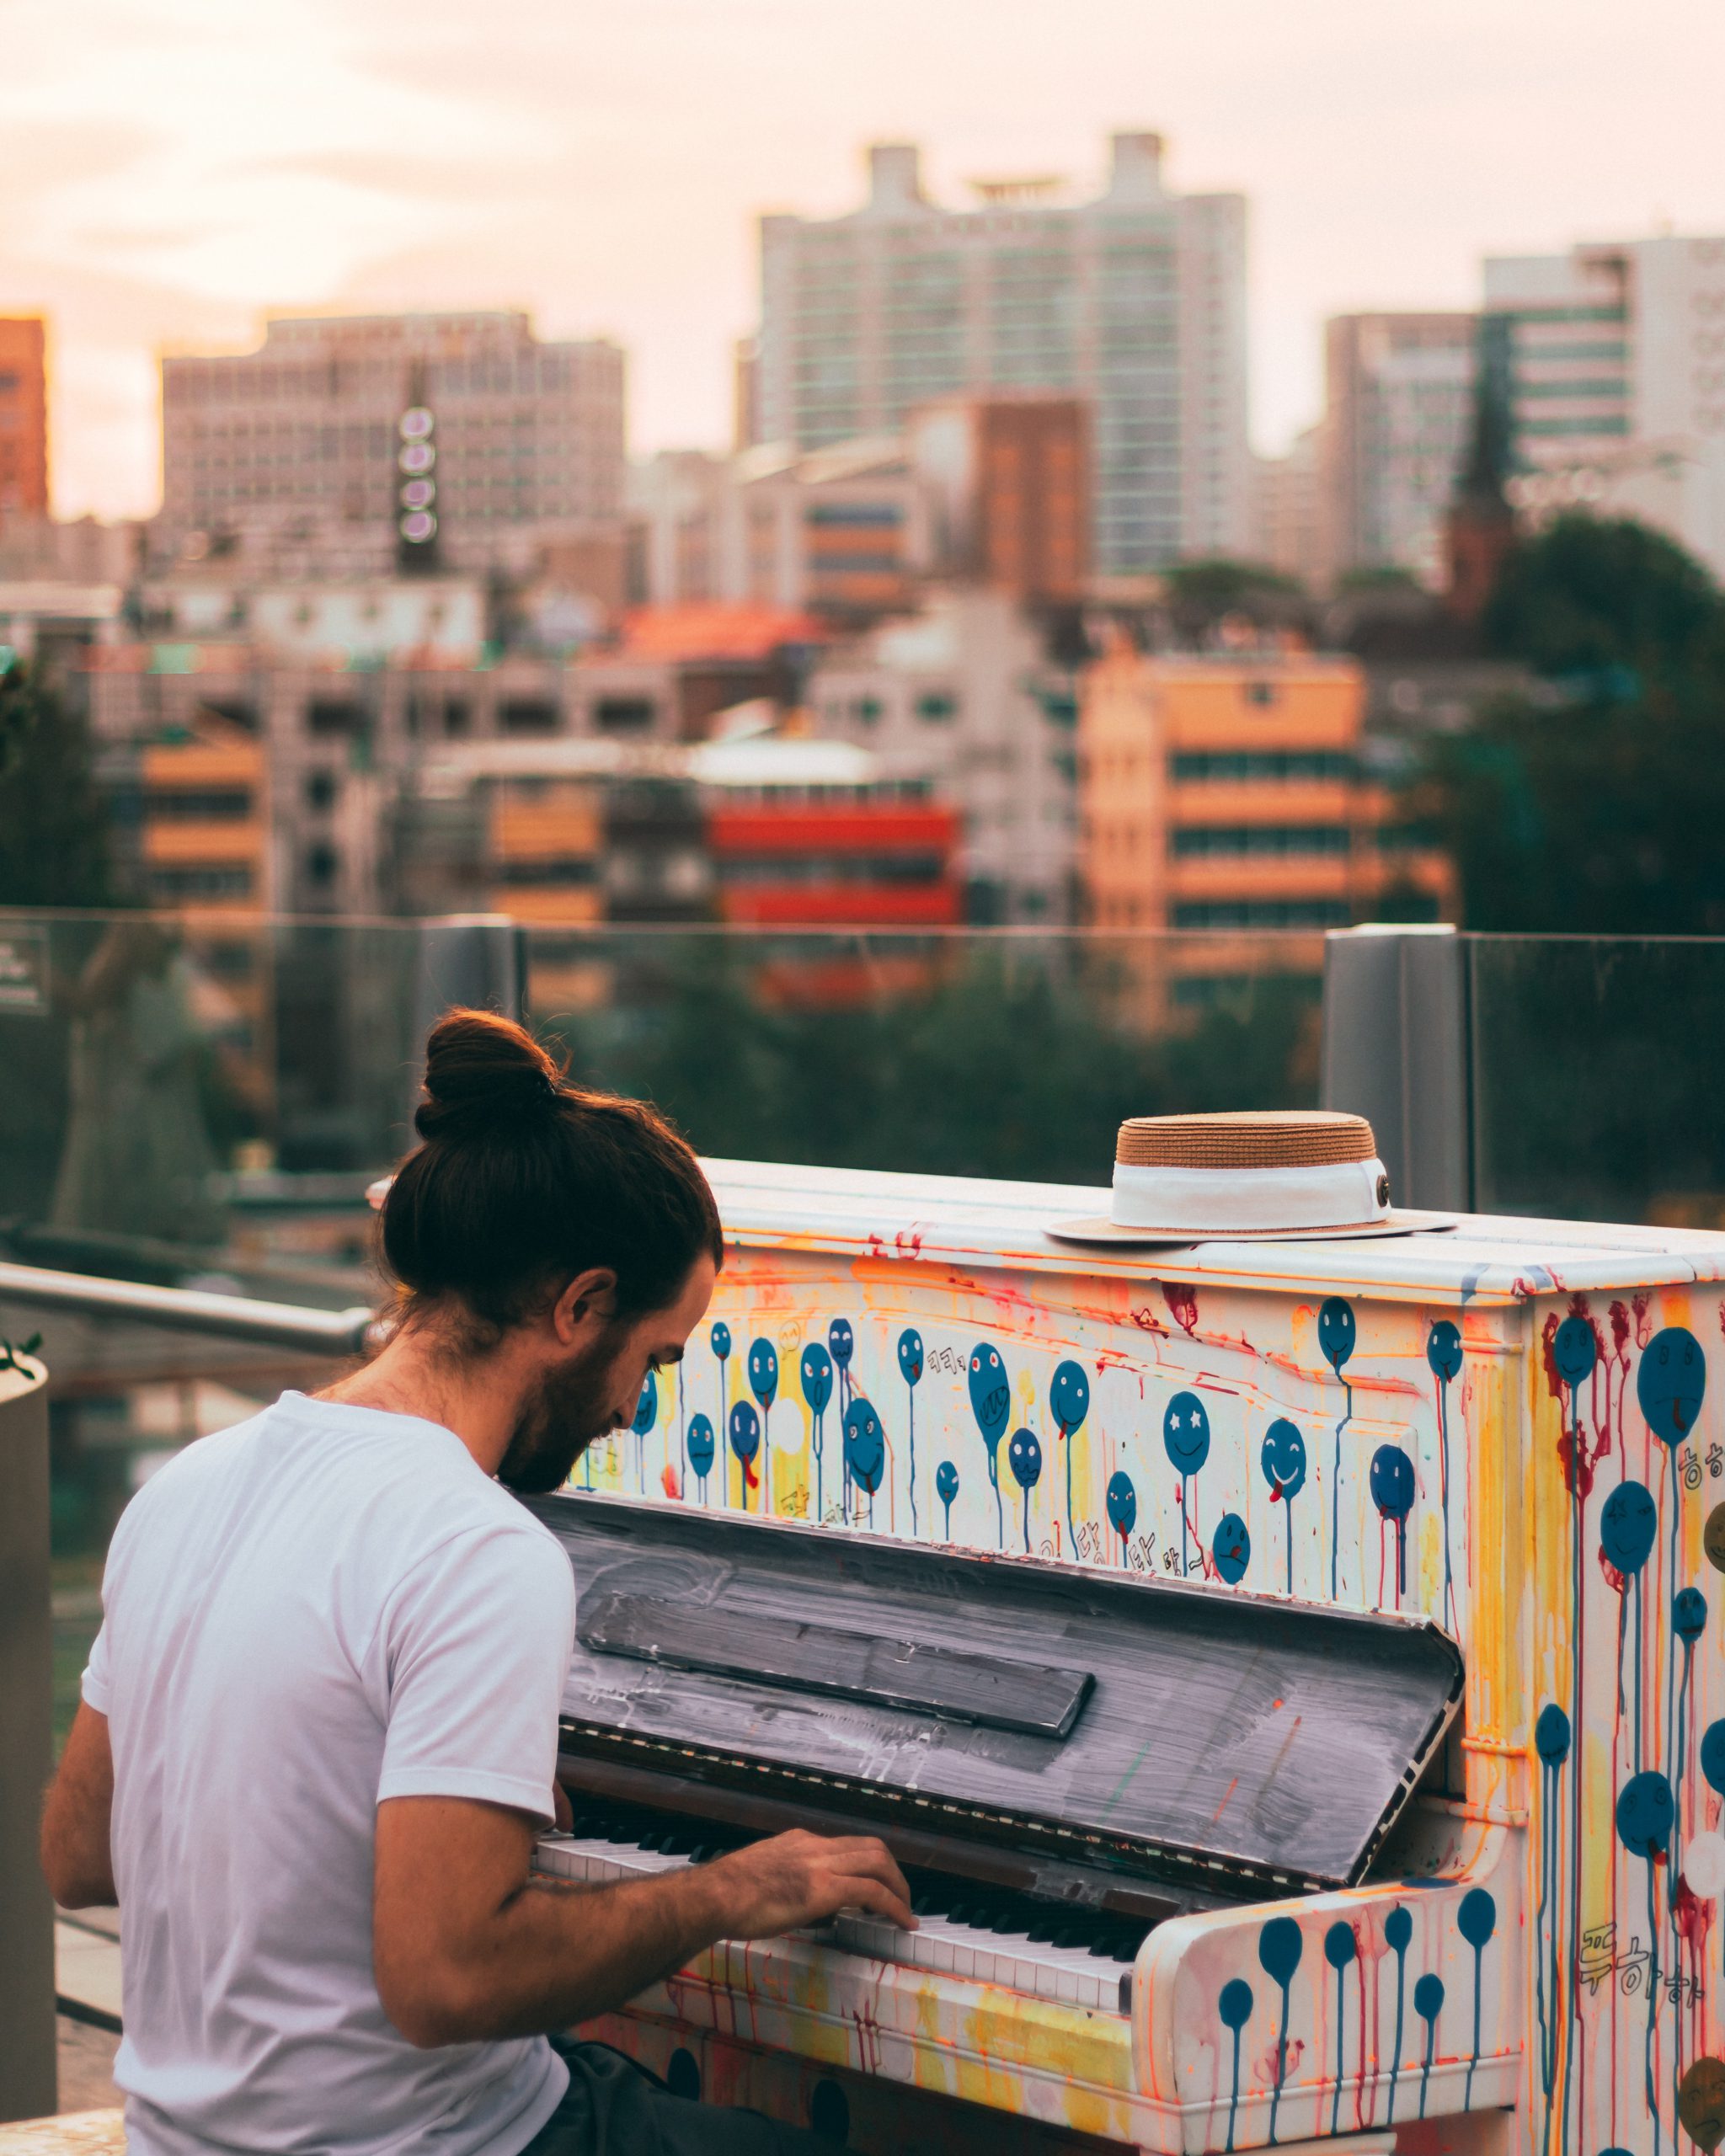 playing piano on rooftop